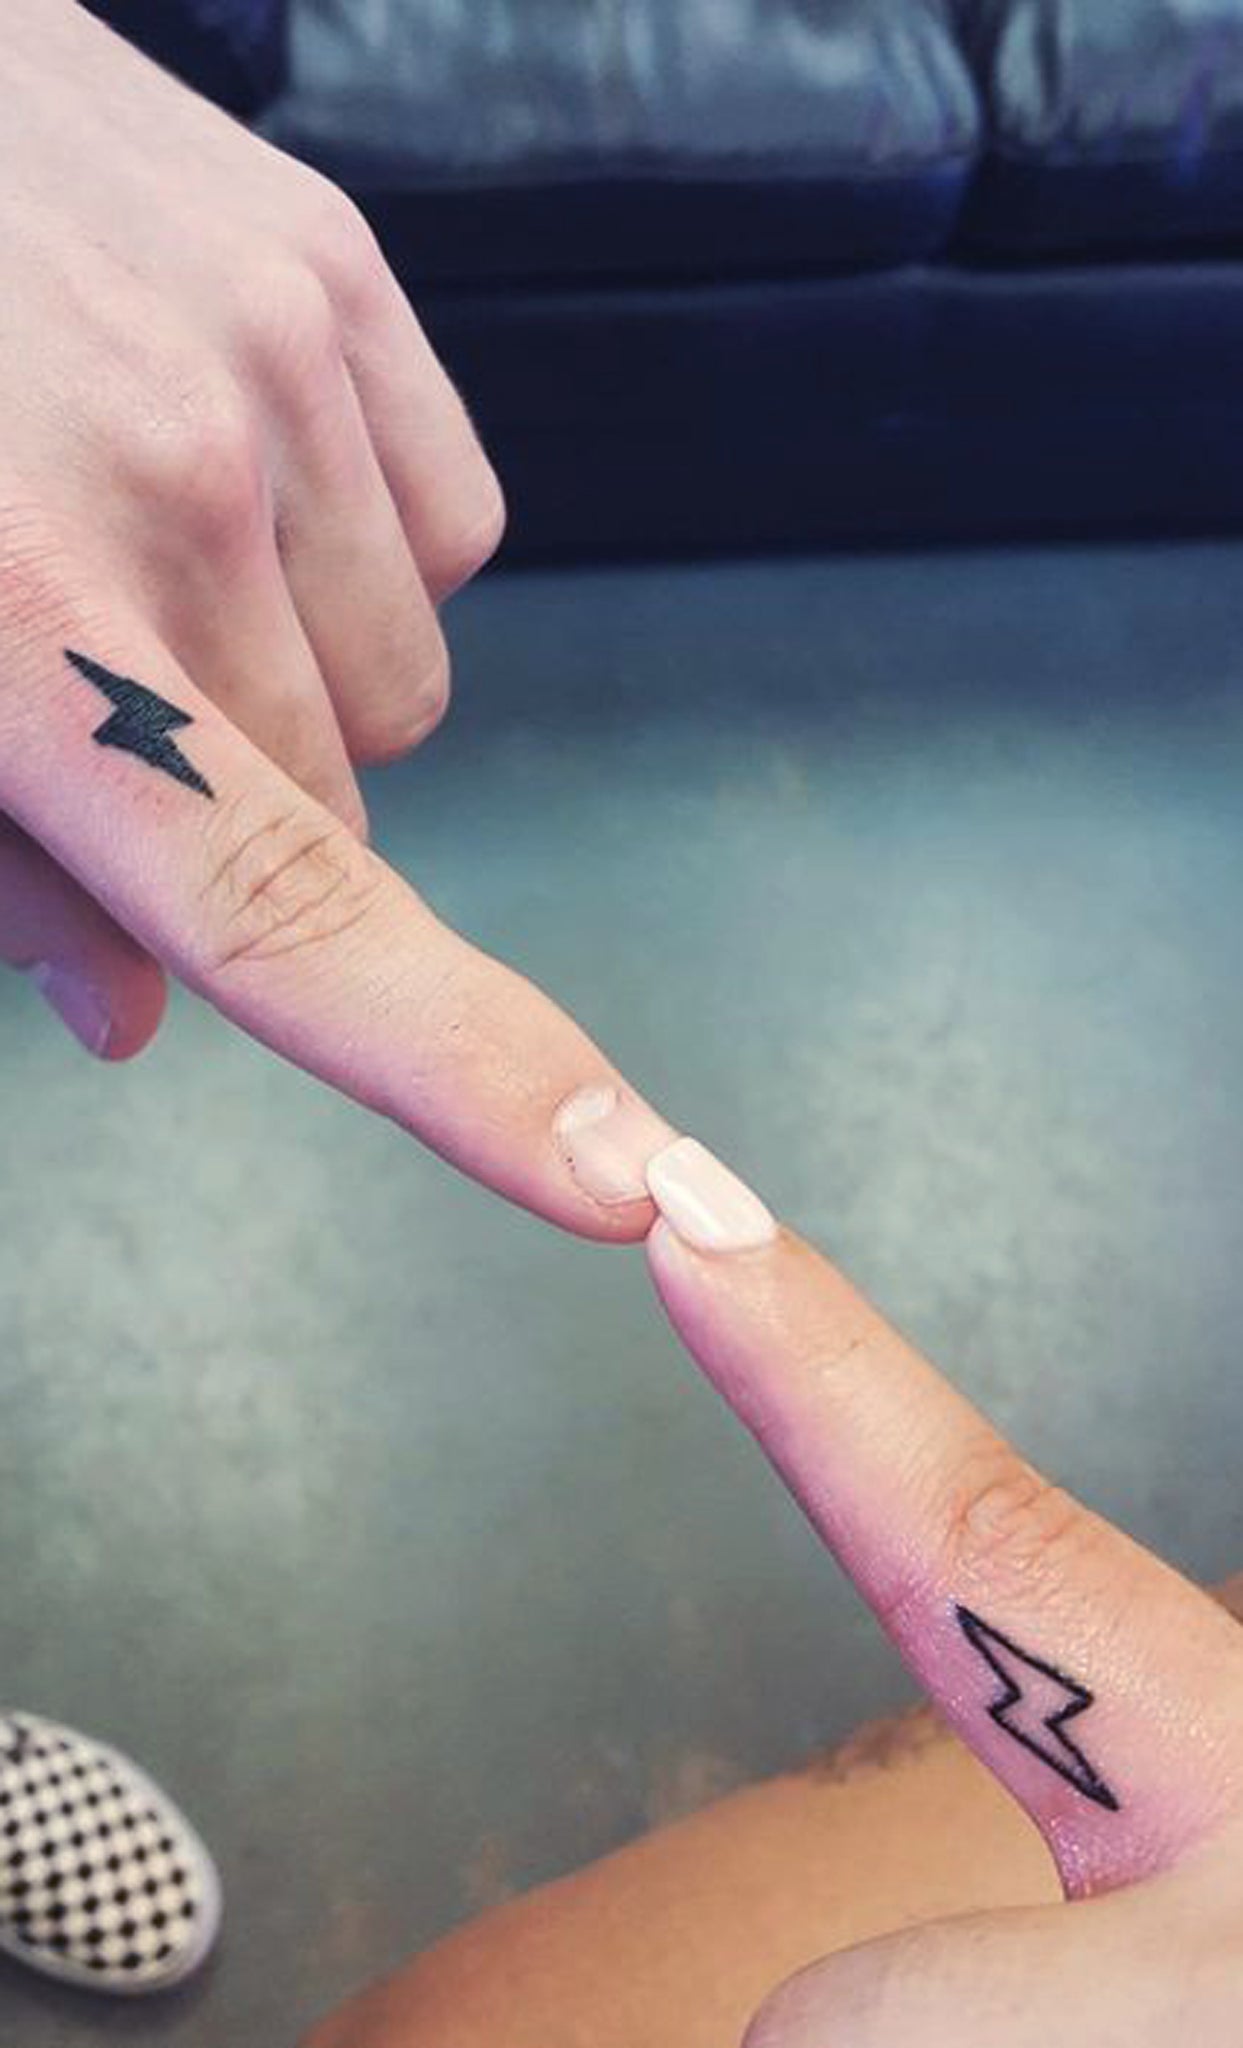 Matching Bestfriend Tattoo Ideas - Small Minimalistic Electric Finger Tatouage for Couples, Siblings, for 2 - www.MyBodiArt.com